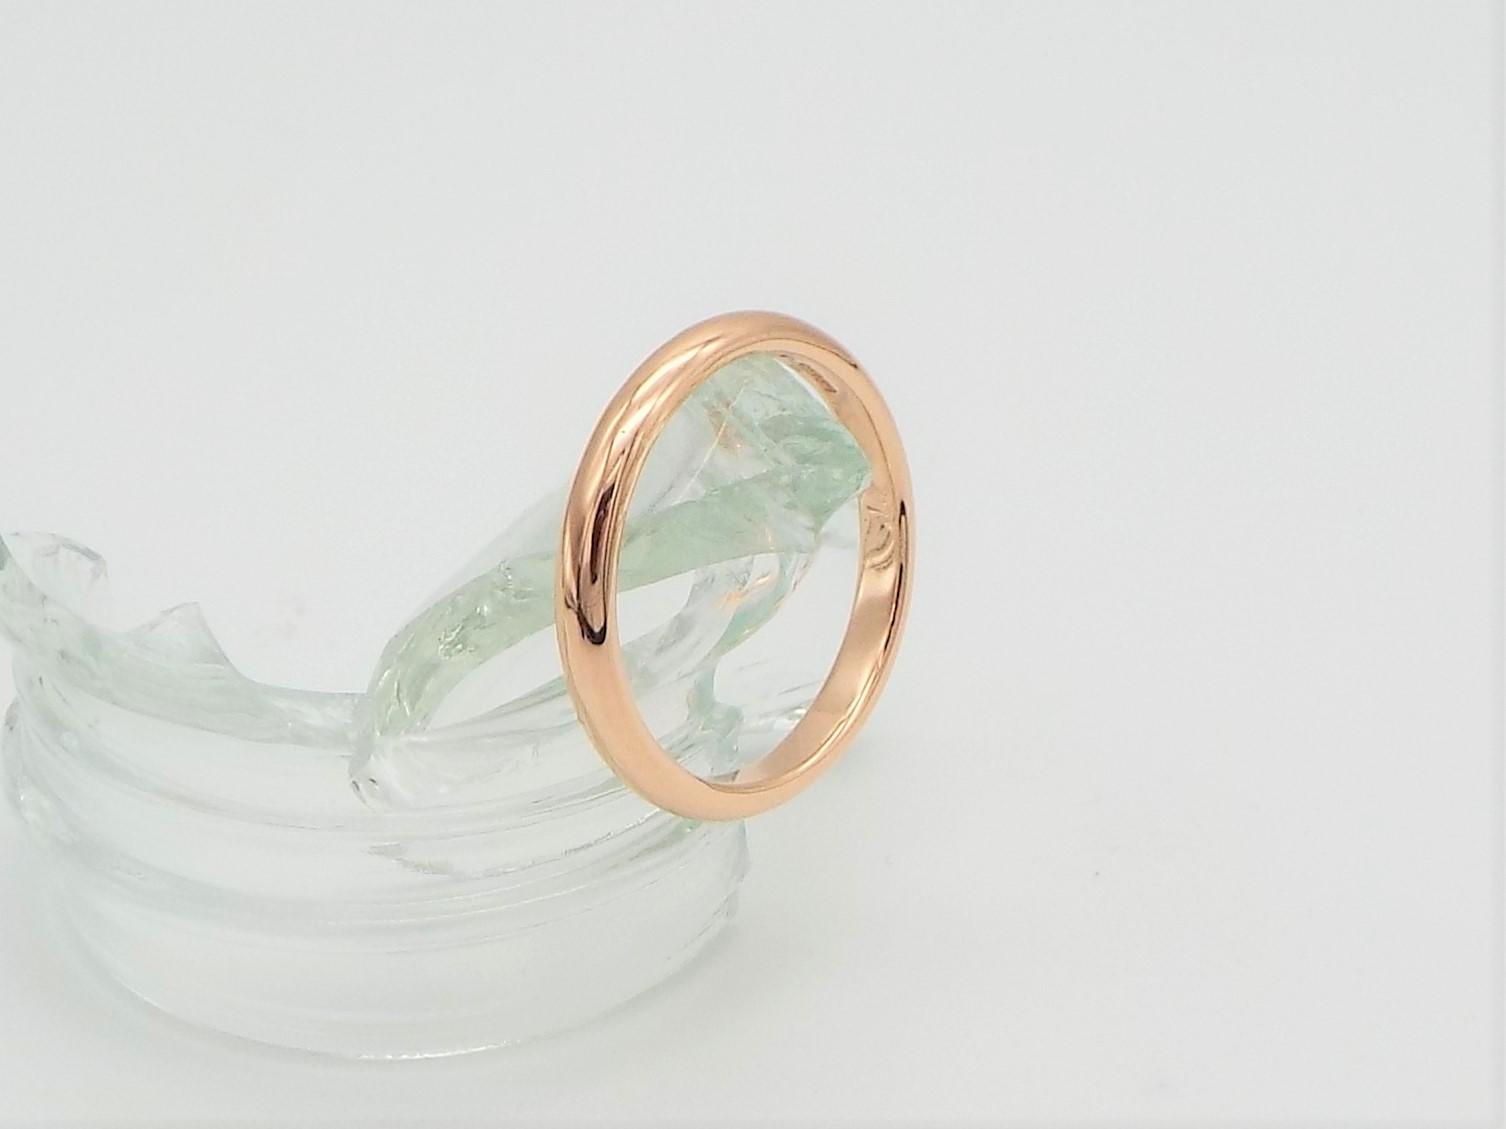 3mm wide D shaped rose gold wedding band